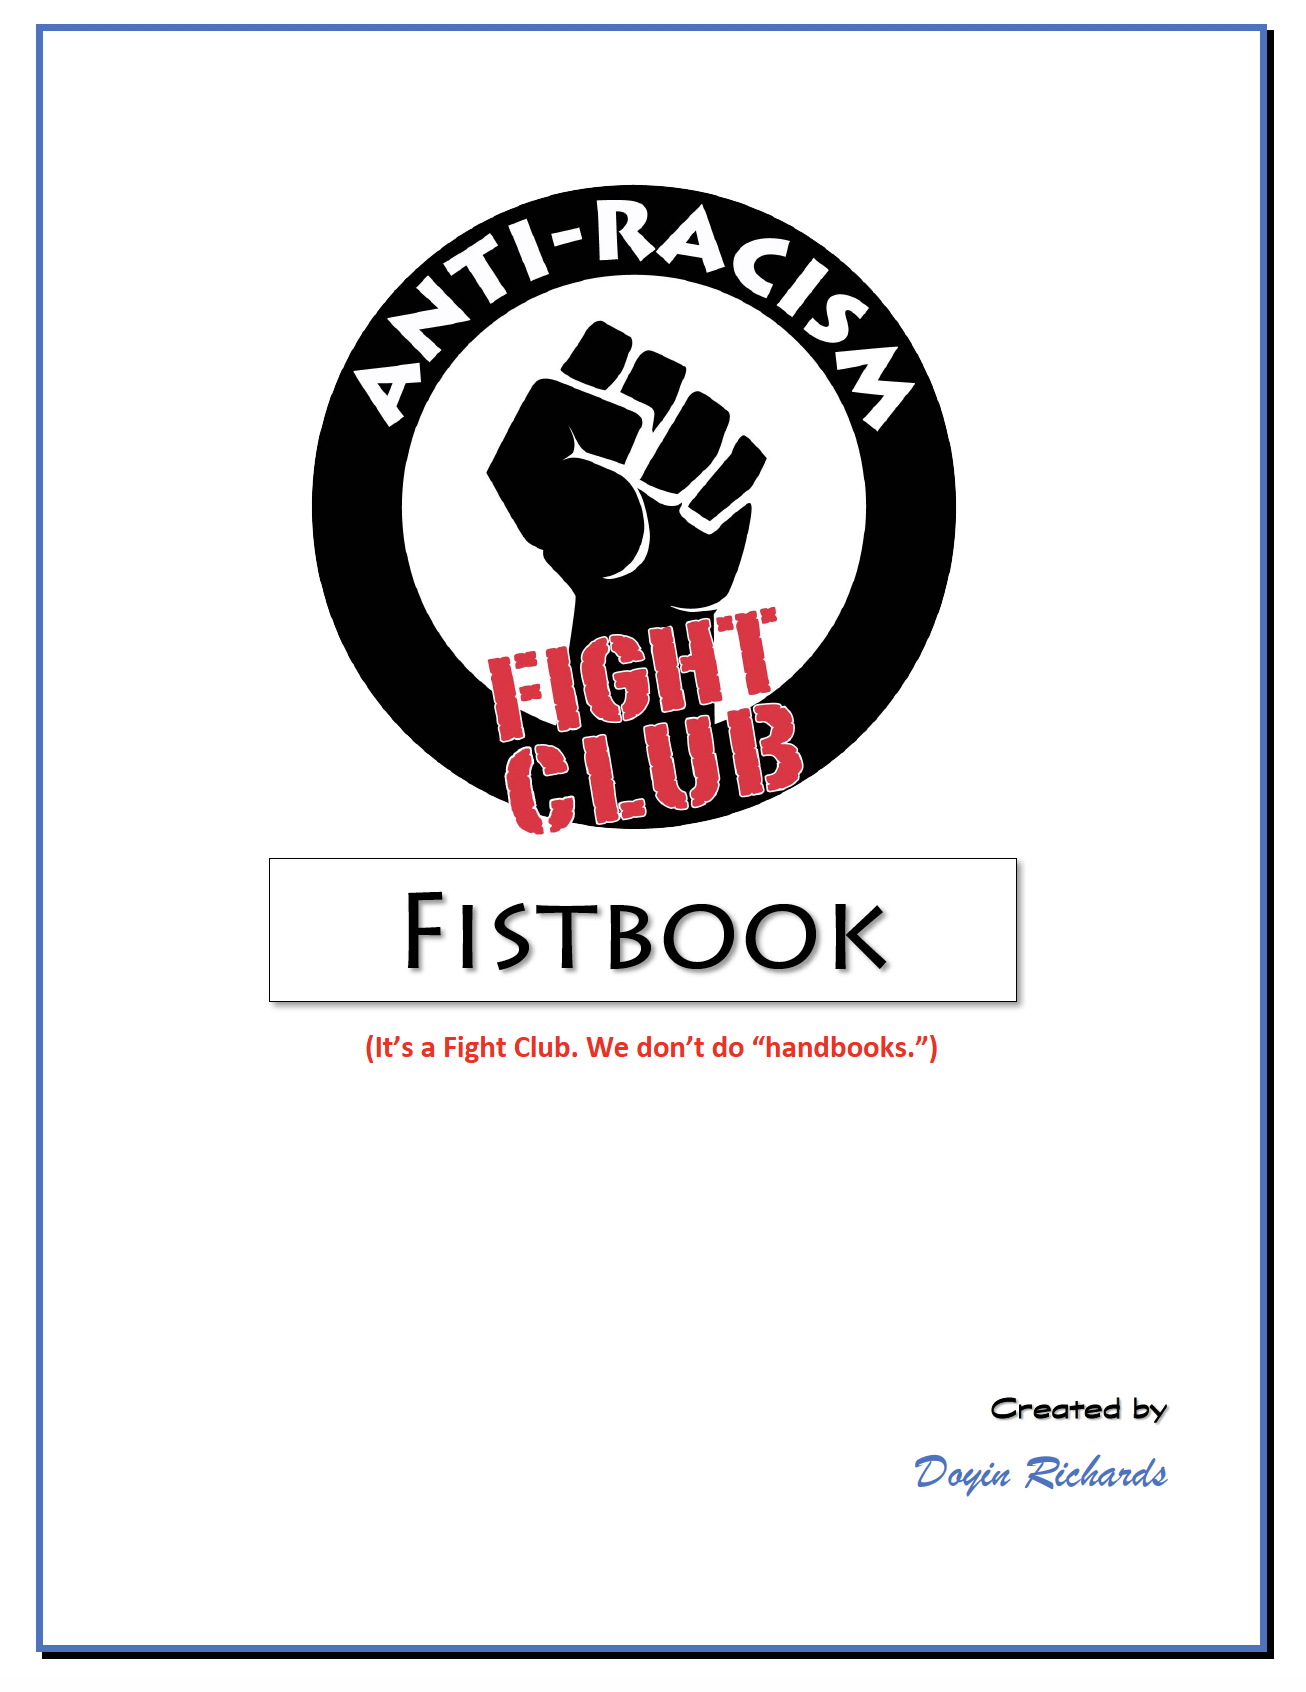 Anti-Racism Fight Club Fist Book Cover